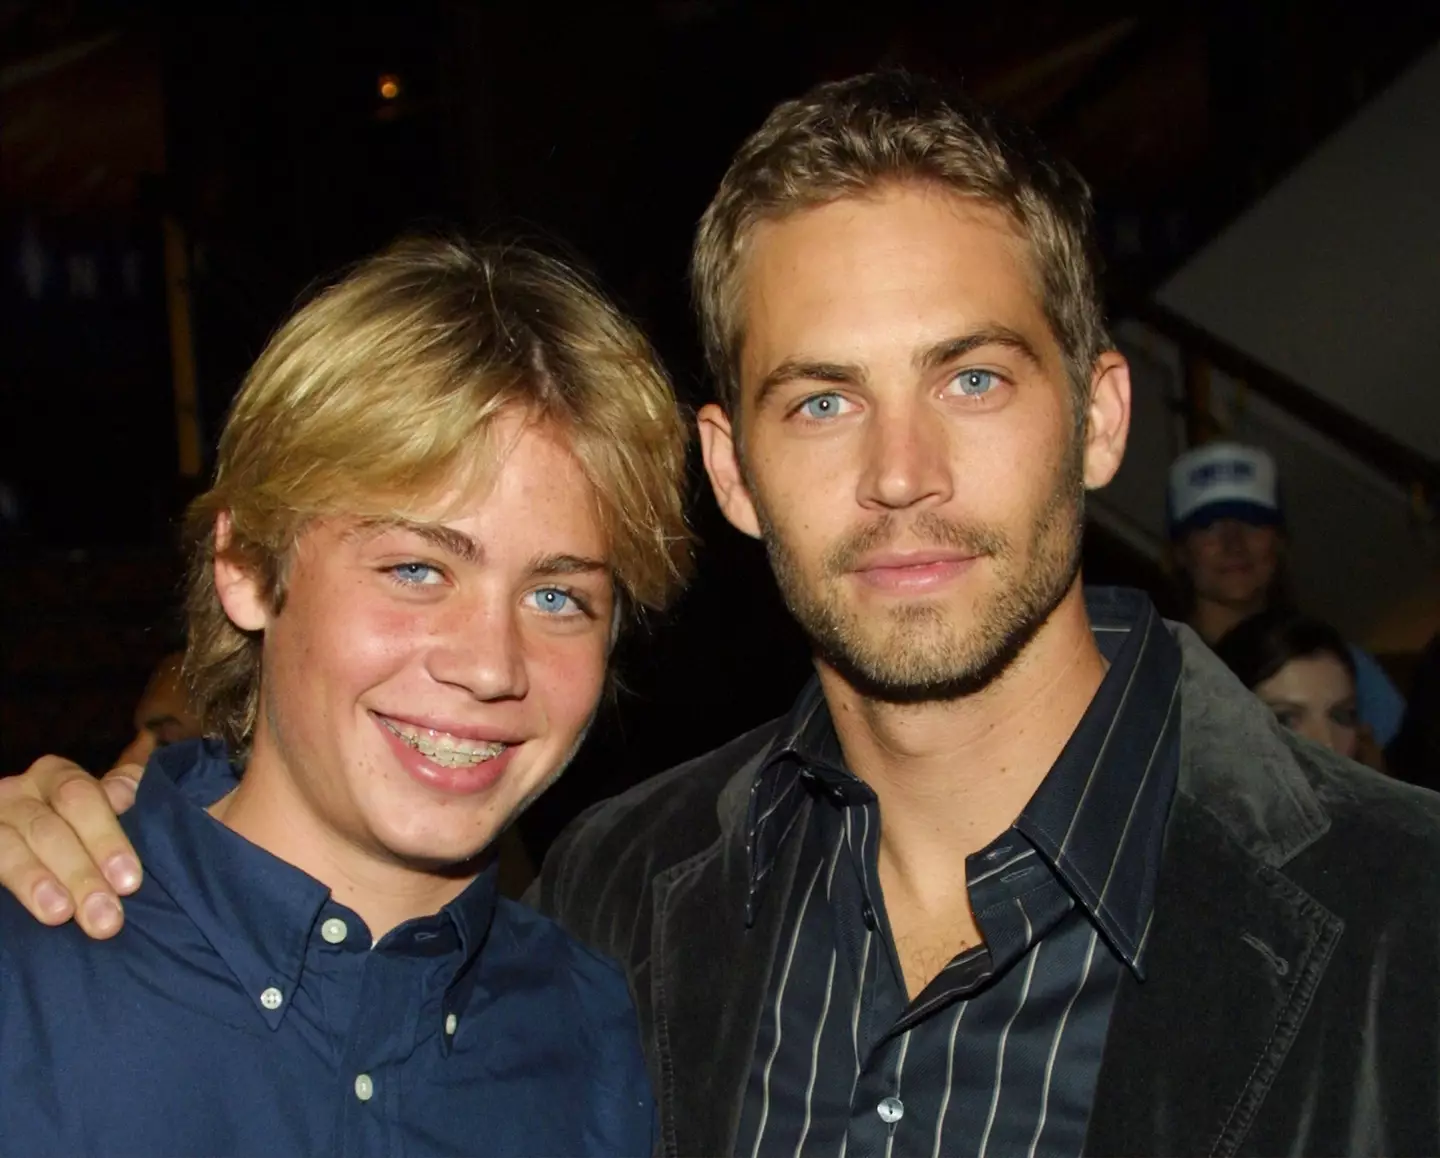 Cody and Paul Walker pictured together in 2003.